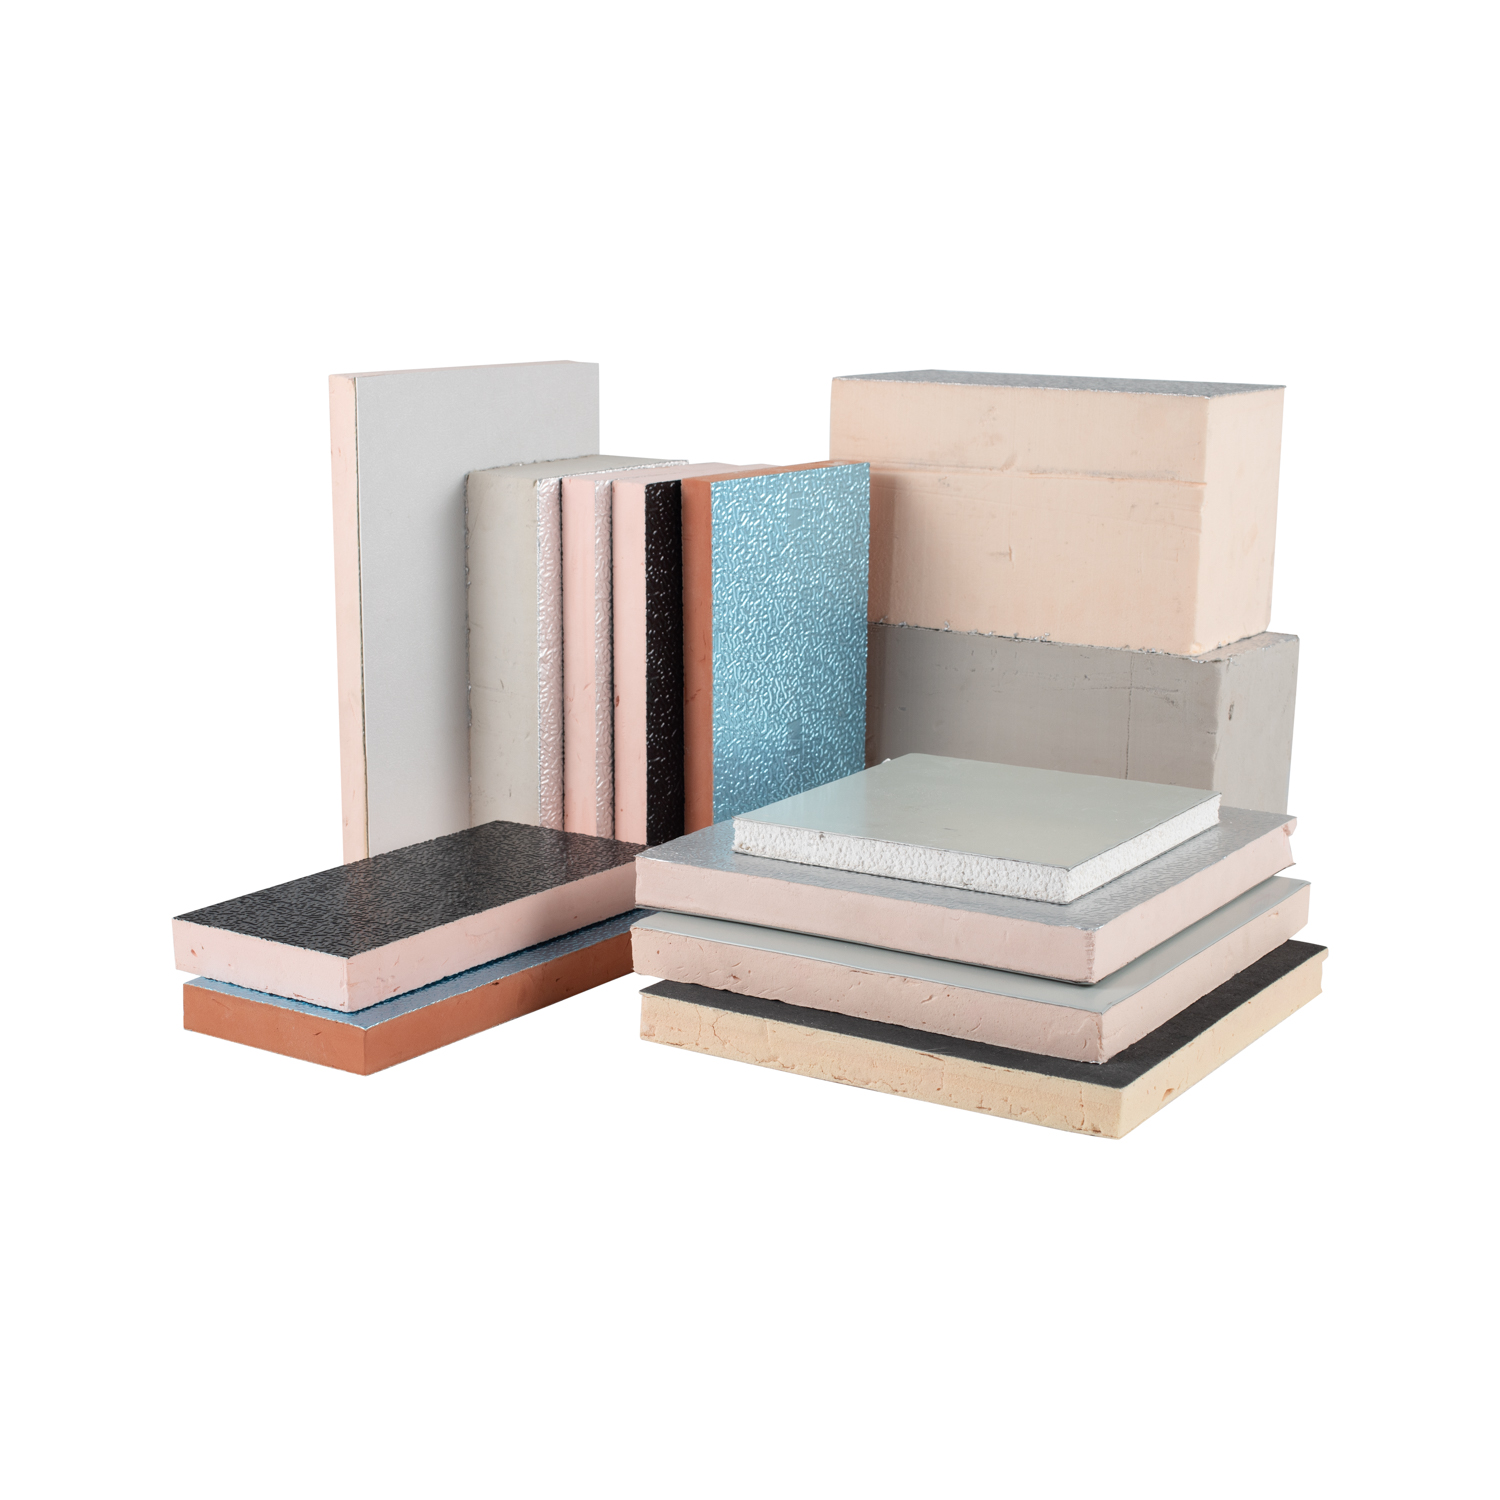 Introduction And Features of Phenolic Wall Insulation Board